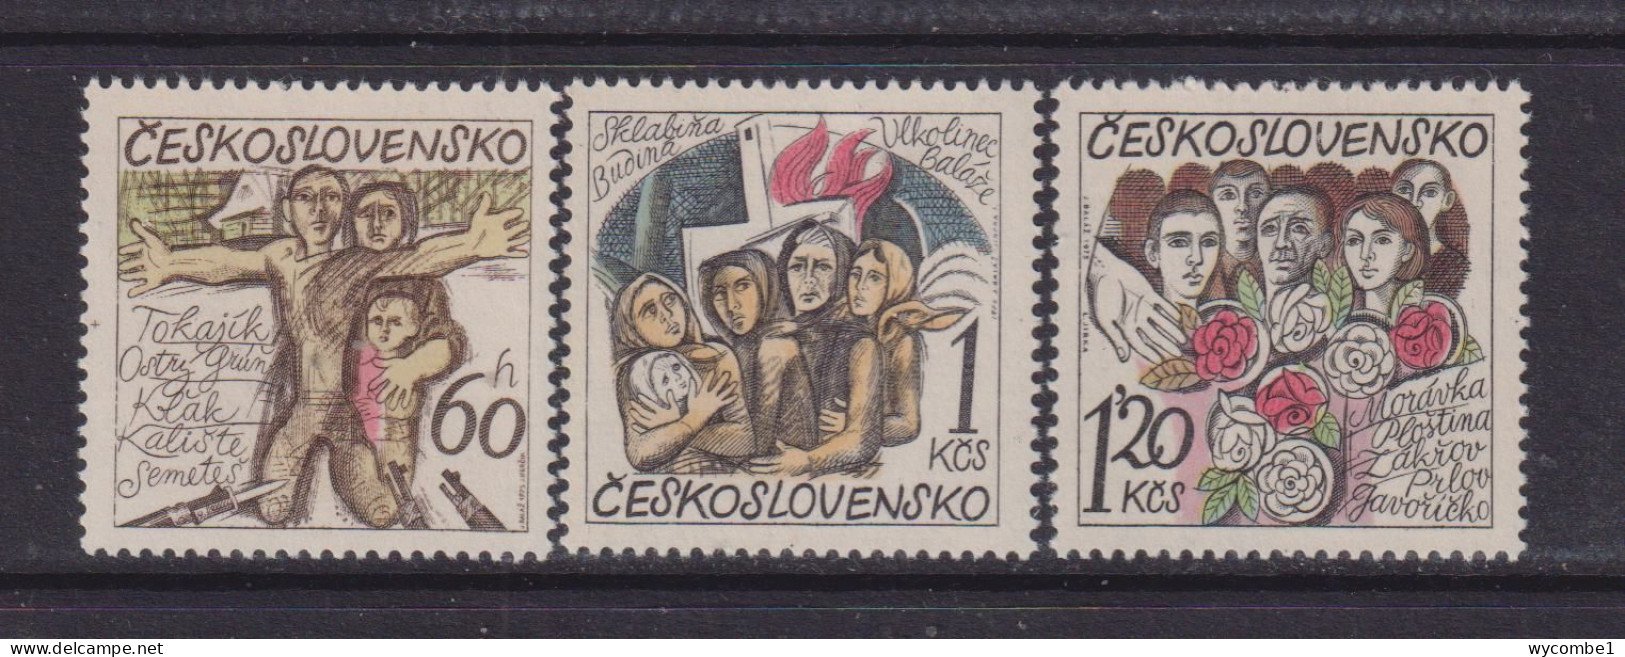 CZECHOSLOVAKIA  - 1975 Razing Of 14 Villages Set Never Hinged Mint - Unused Stamps